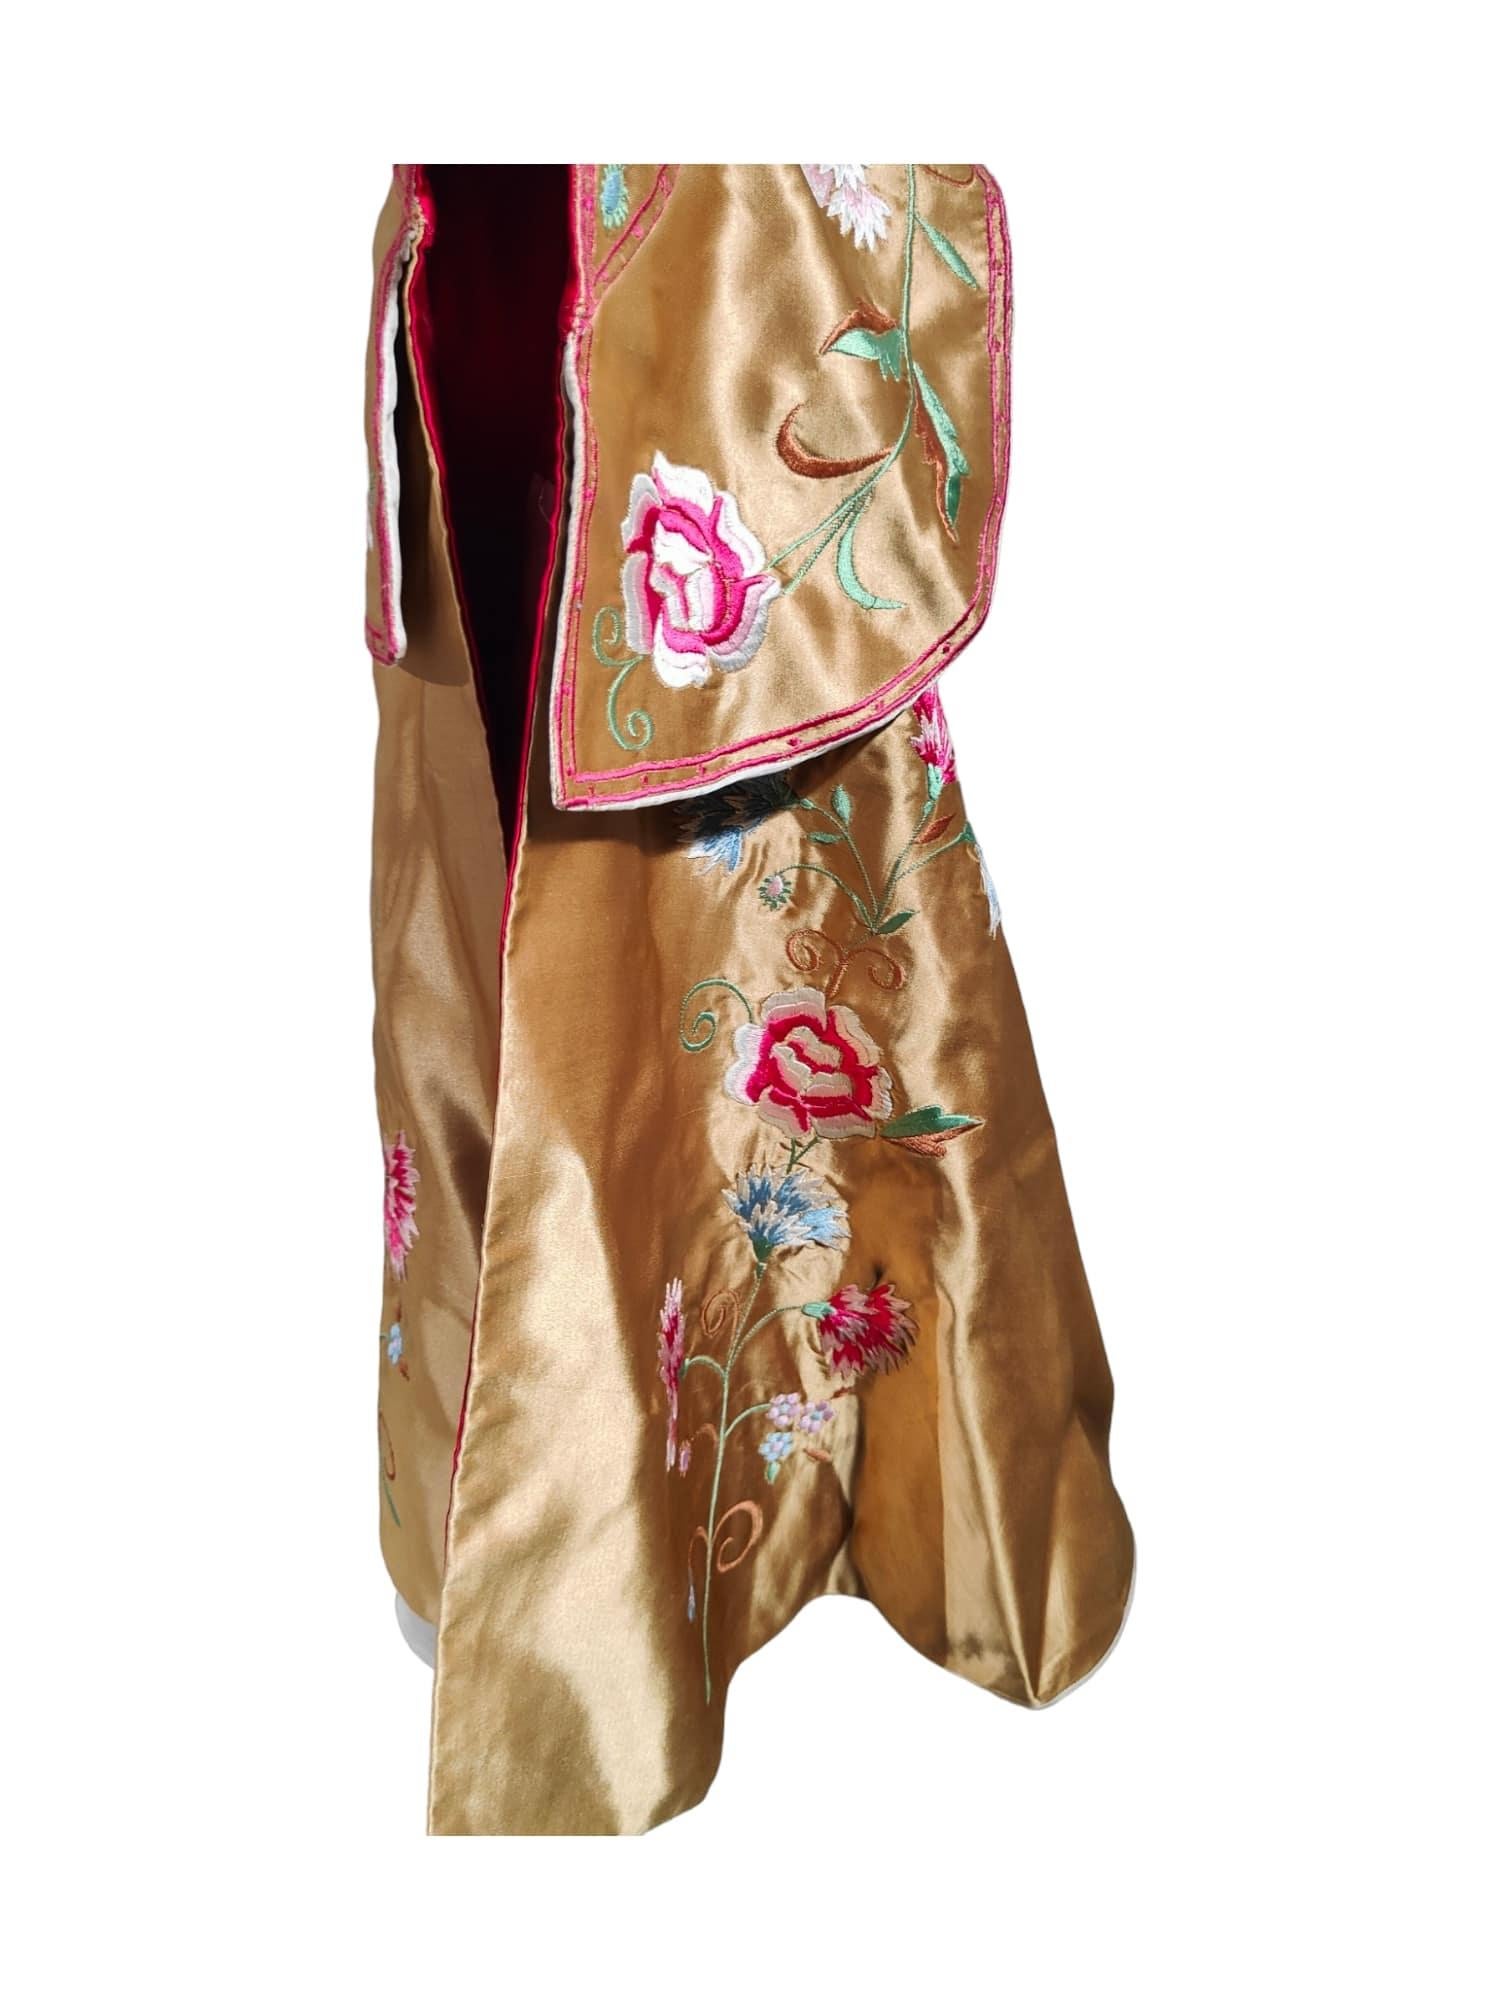 Bullfighter Costume for Children from the 20th Century - A Gem of Children's Bul For Sale 4